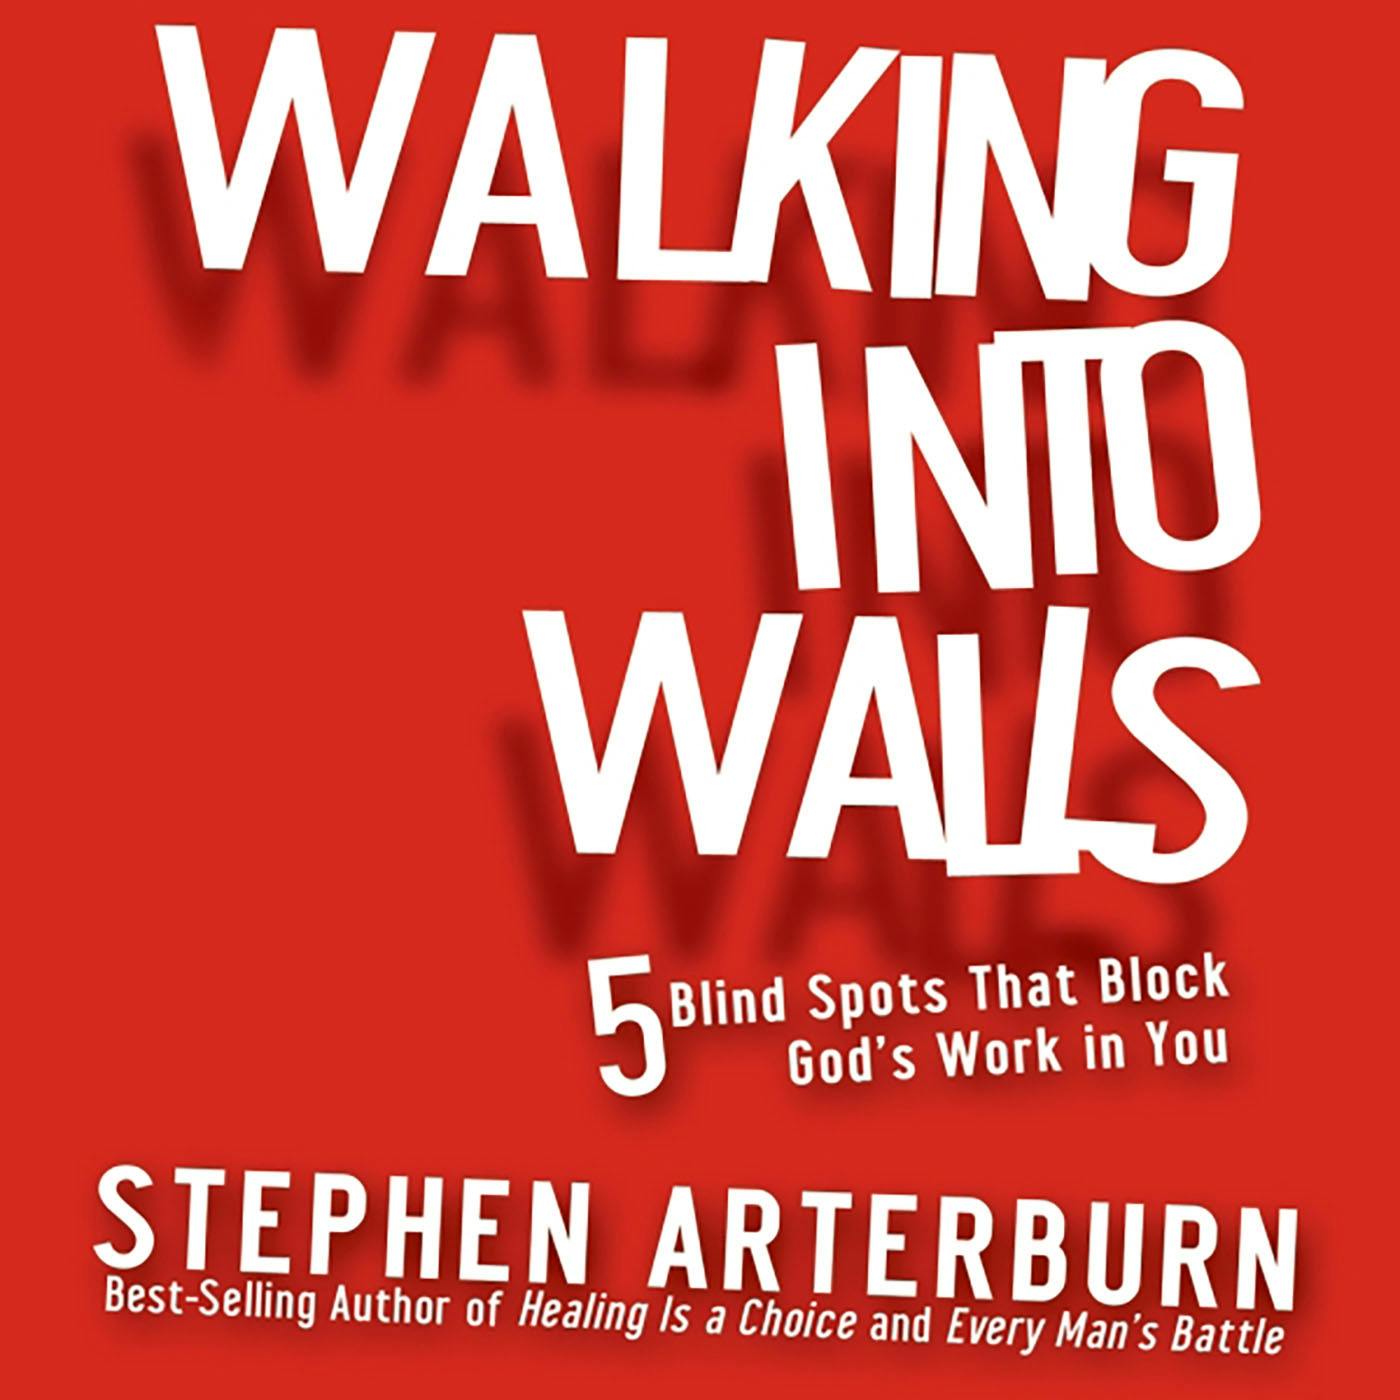 Walking Into Walls: 5 Blind Spots That Block God's Work in You - undefined